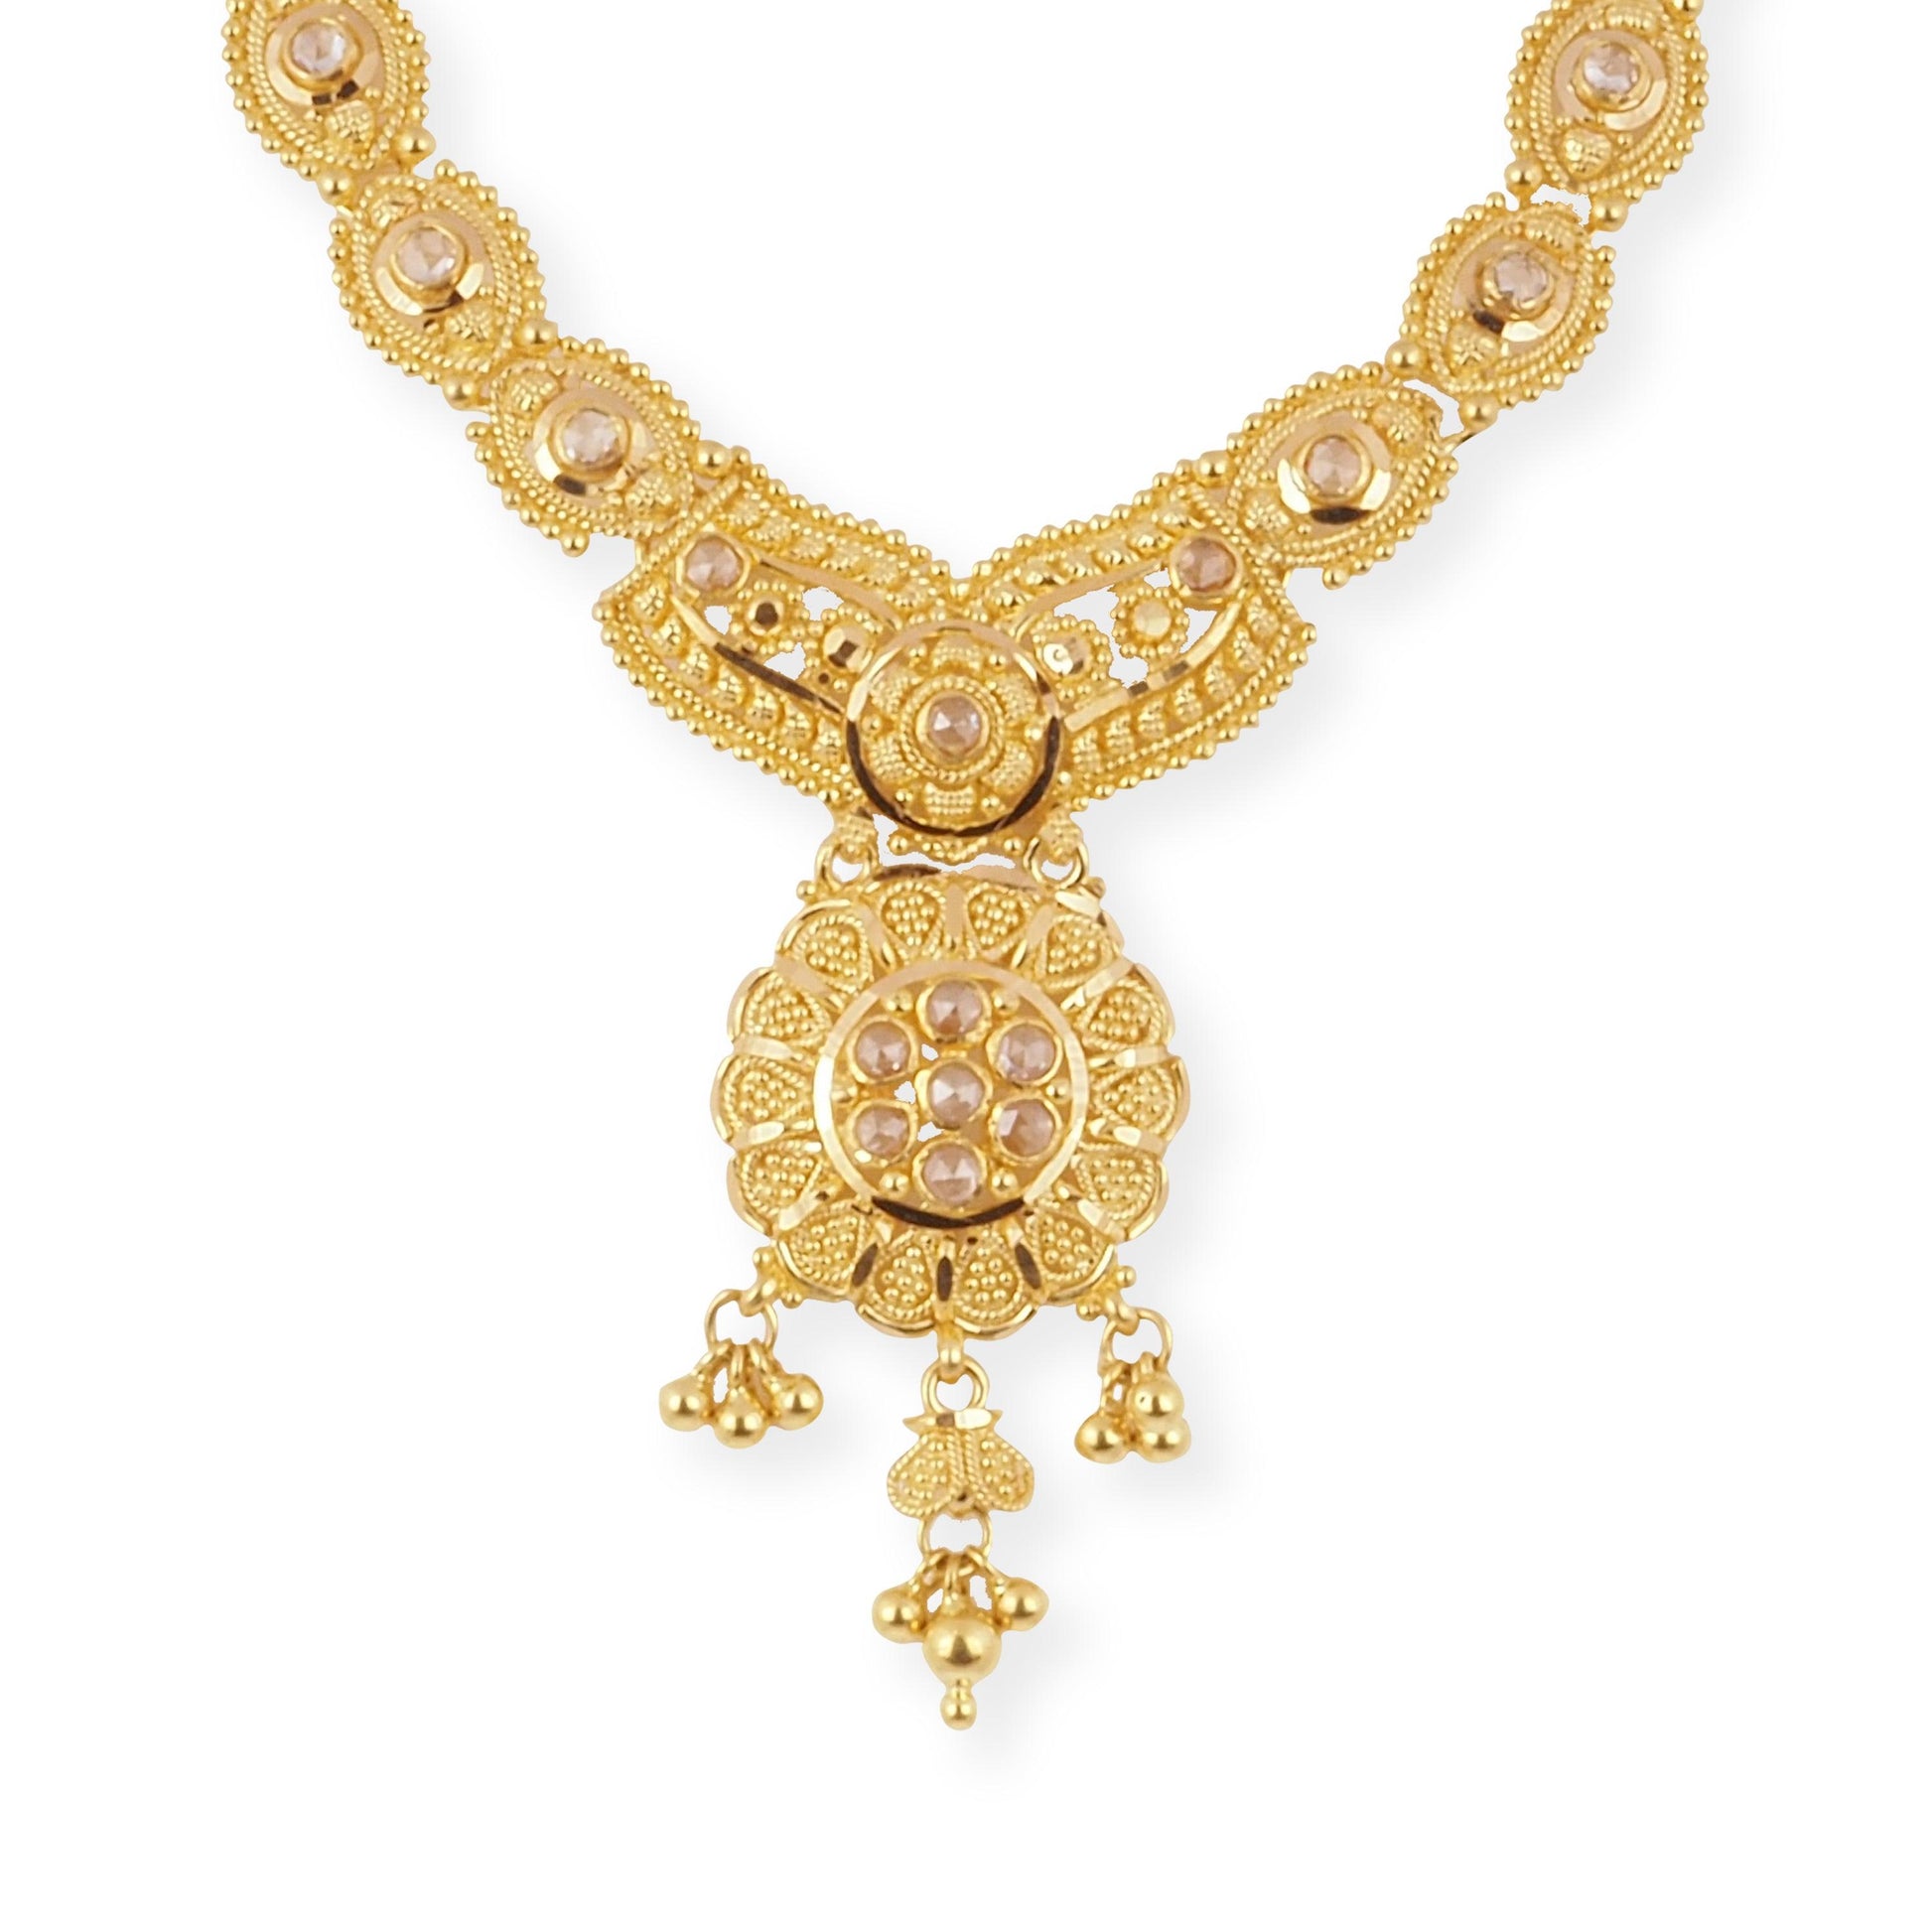 22ct Gold Filigree Design Necklace with Cubic Zirconia Stones & Hook Clasp-8602 - Minar Jewellers